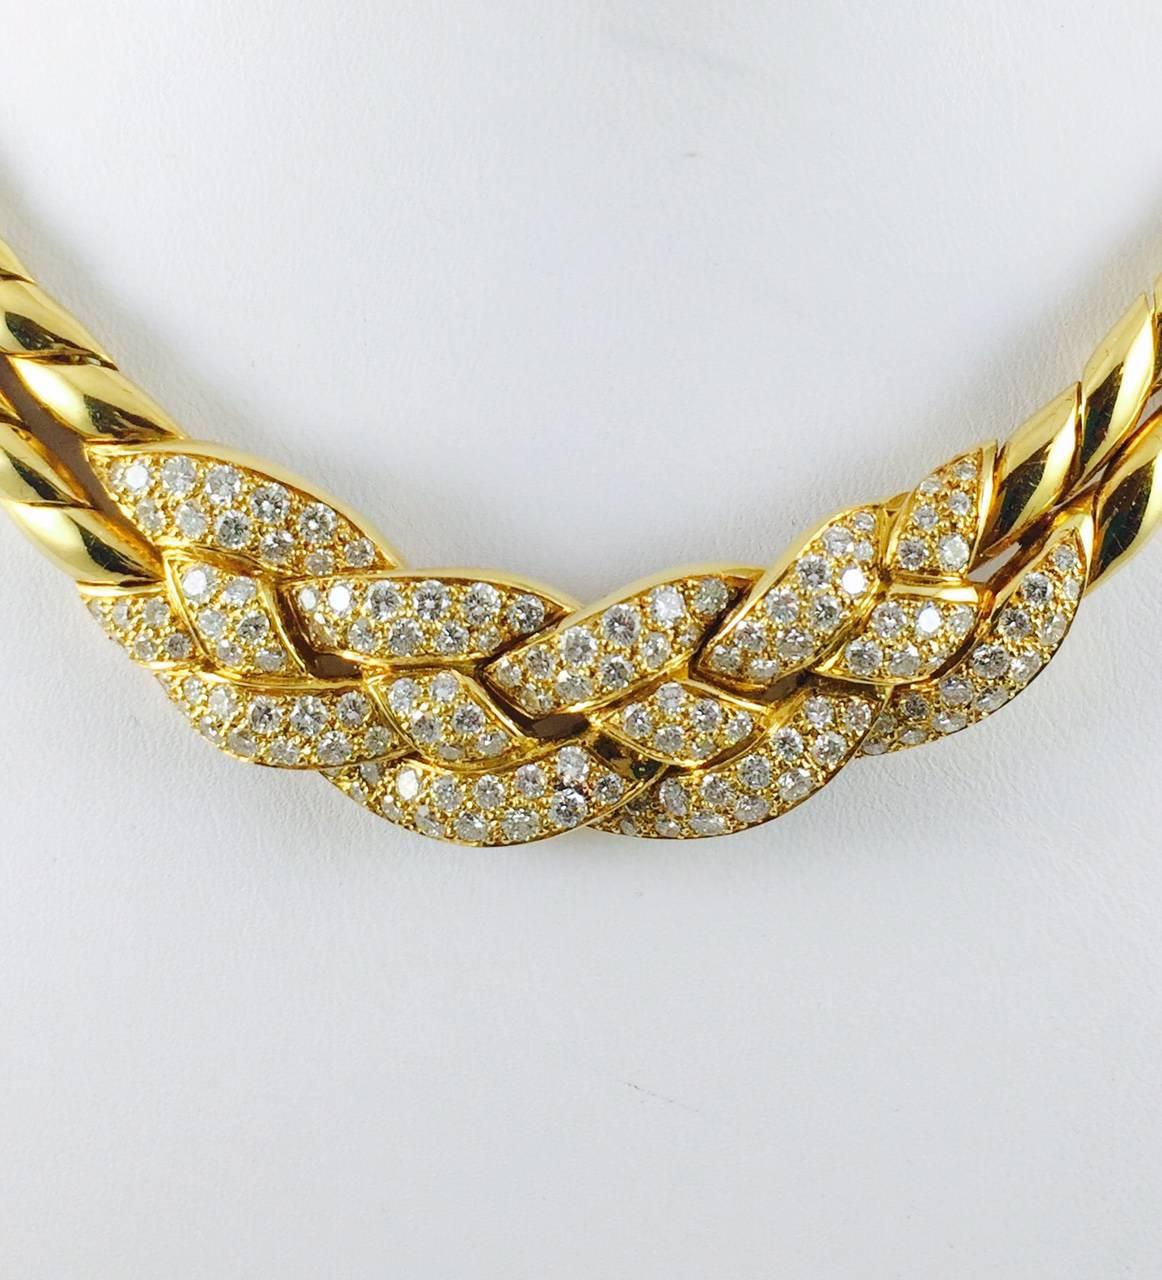 Van Cleef & Arpels Diamond Gold Choker Necklace In Excellent Condition For Sale In Palm Beach, FL